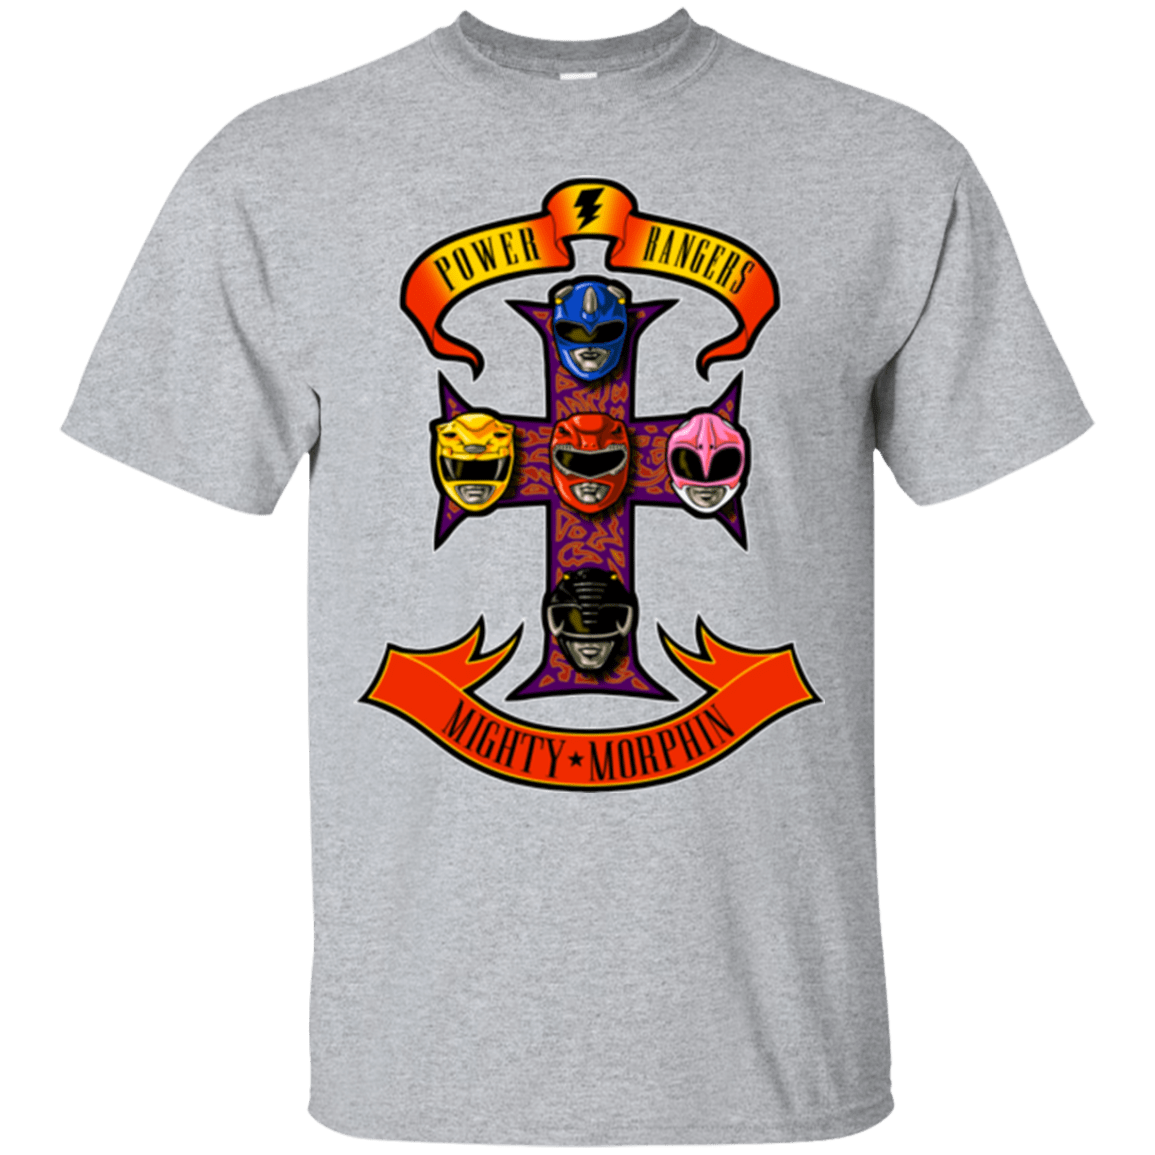 T-Shirts Sport Grey / Small Appetite for Morphin T-Shirt